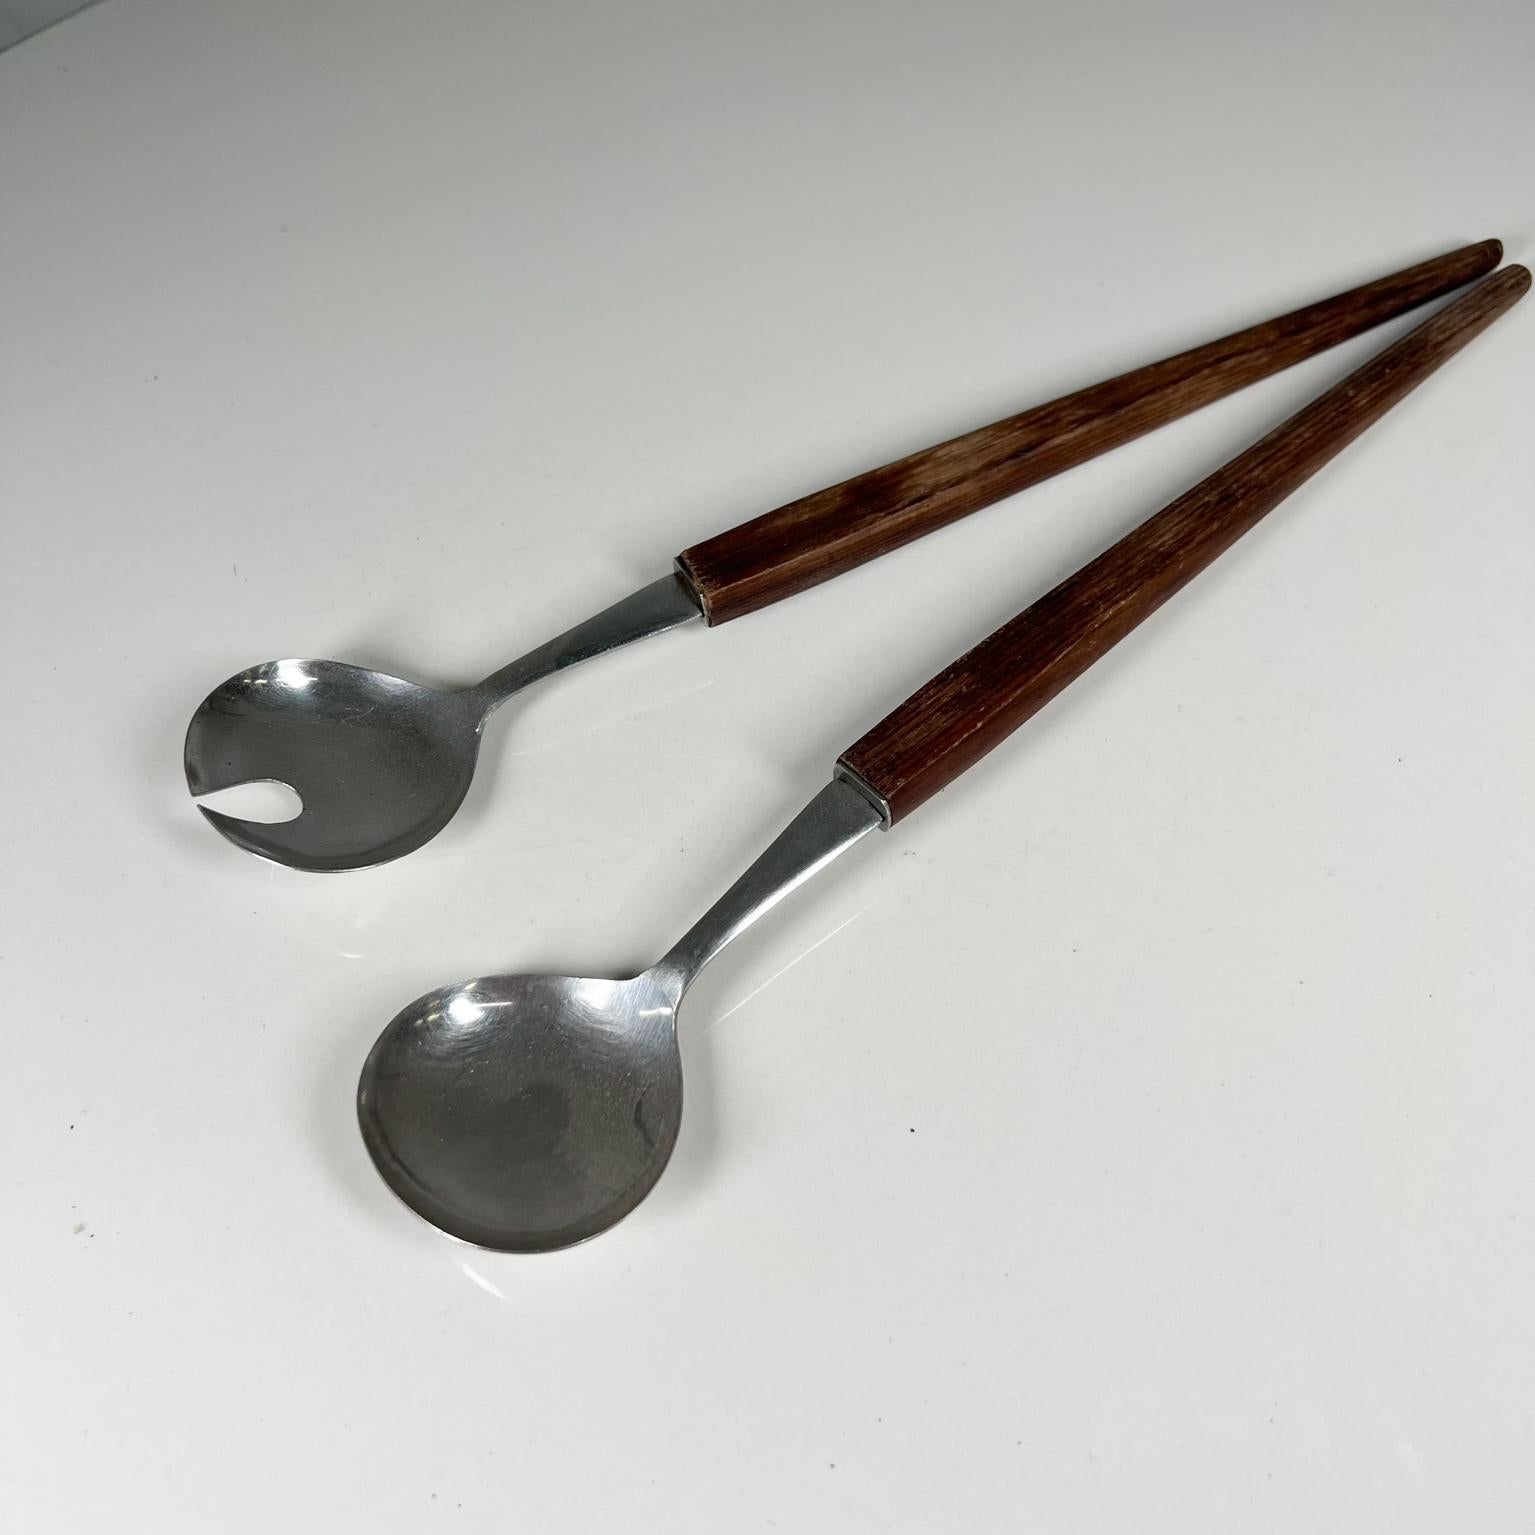 1960s Modern stainless steel wood salad serving set utensils Japan.
Stainless Steel Wood
Stamped
Measures: 12.88 x 2.38 x .5
Original vintage condition unrestored
See images provided.